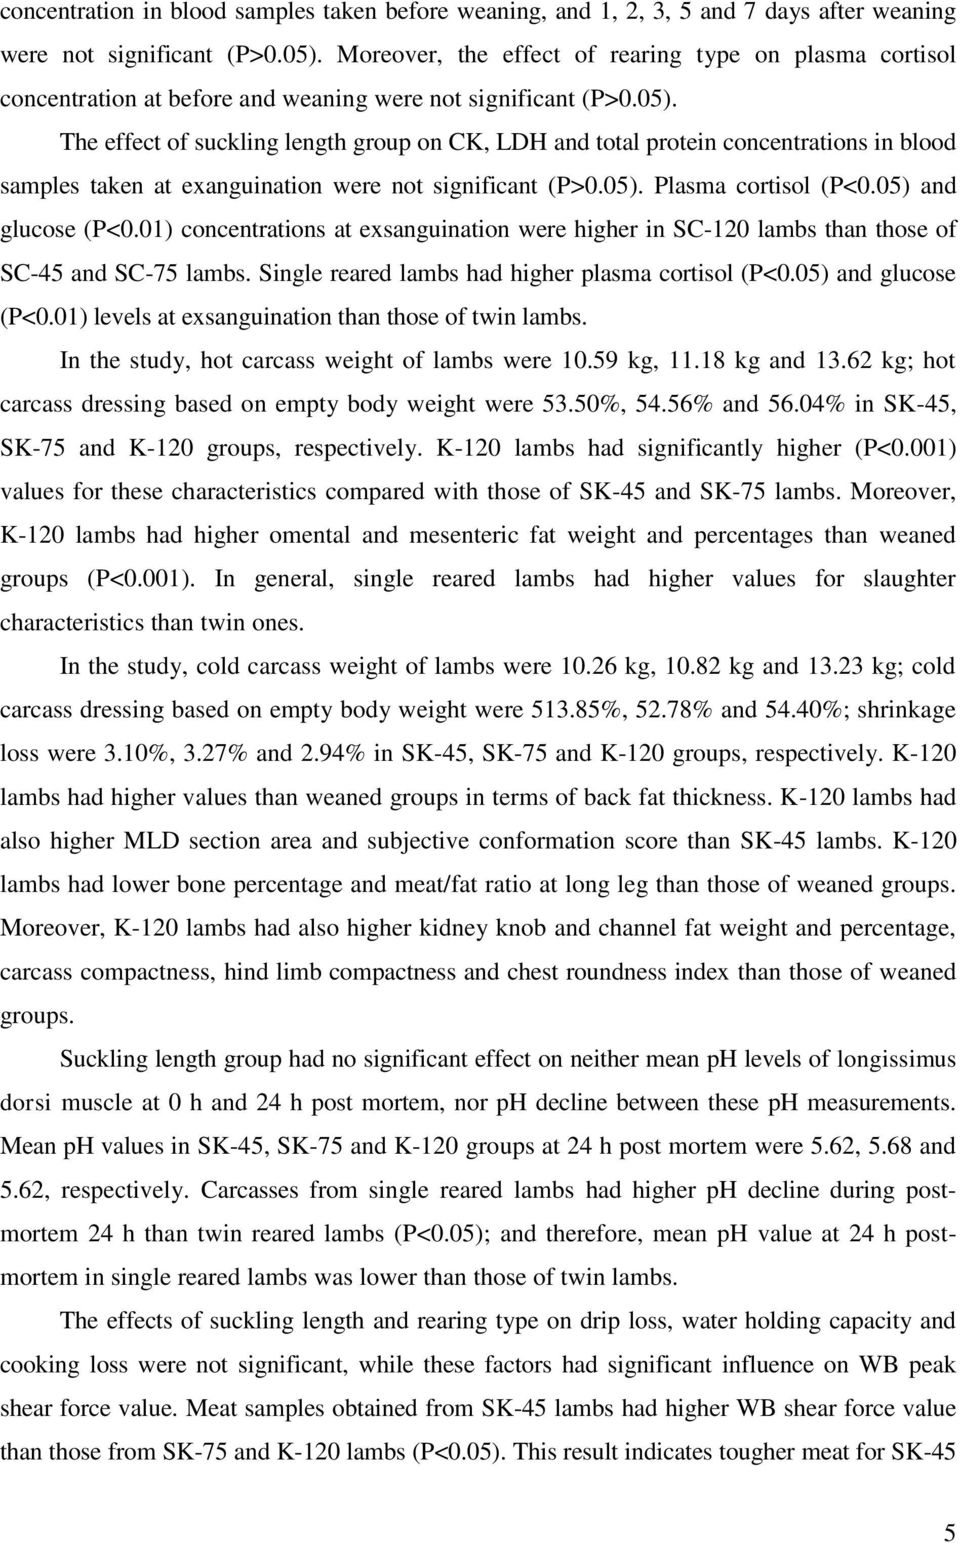 The effect of suckling length group on CK, LDH and total protein concentrations in blood samples taken at exanguination were not significant (P>0.05). Plasma cortisol (P<0.05) and glucose (P<0.